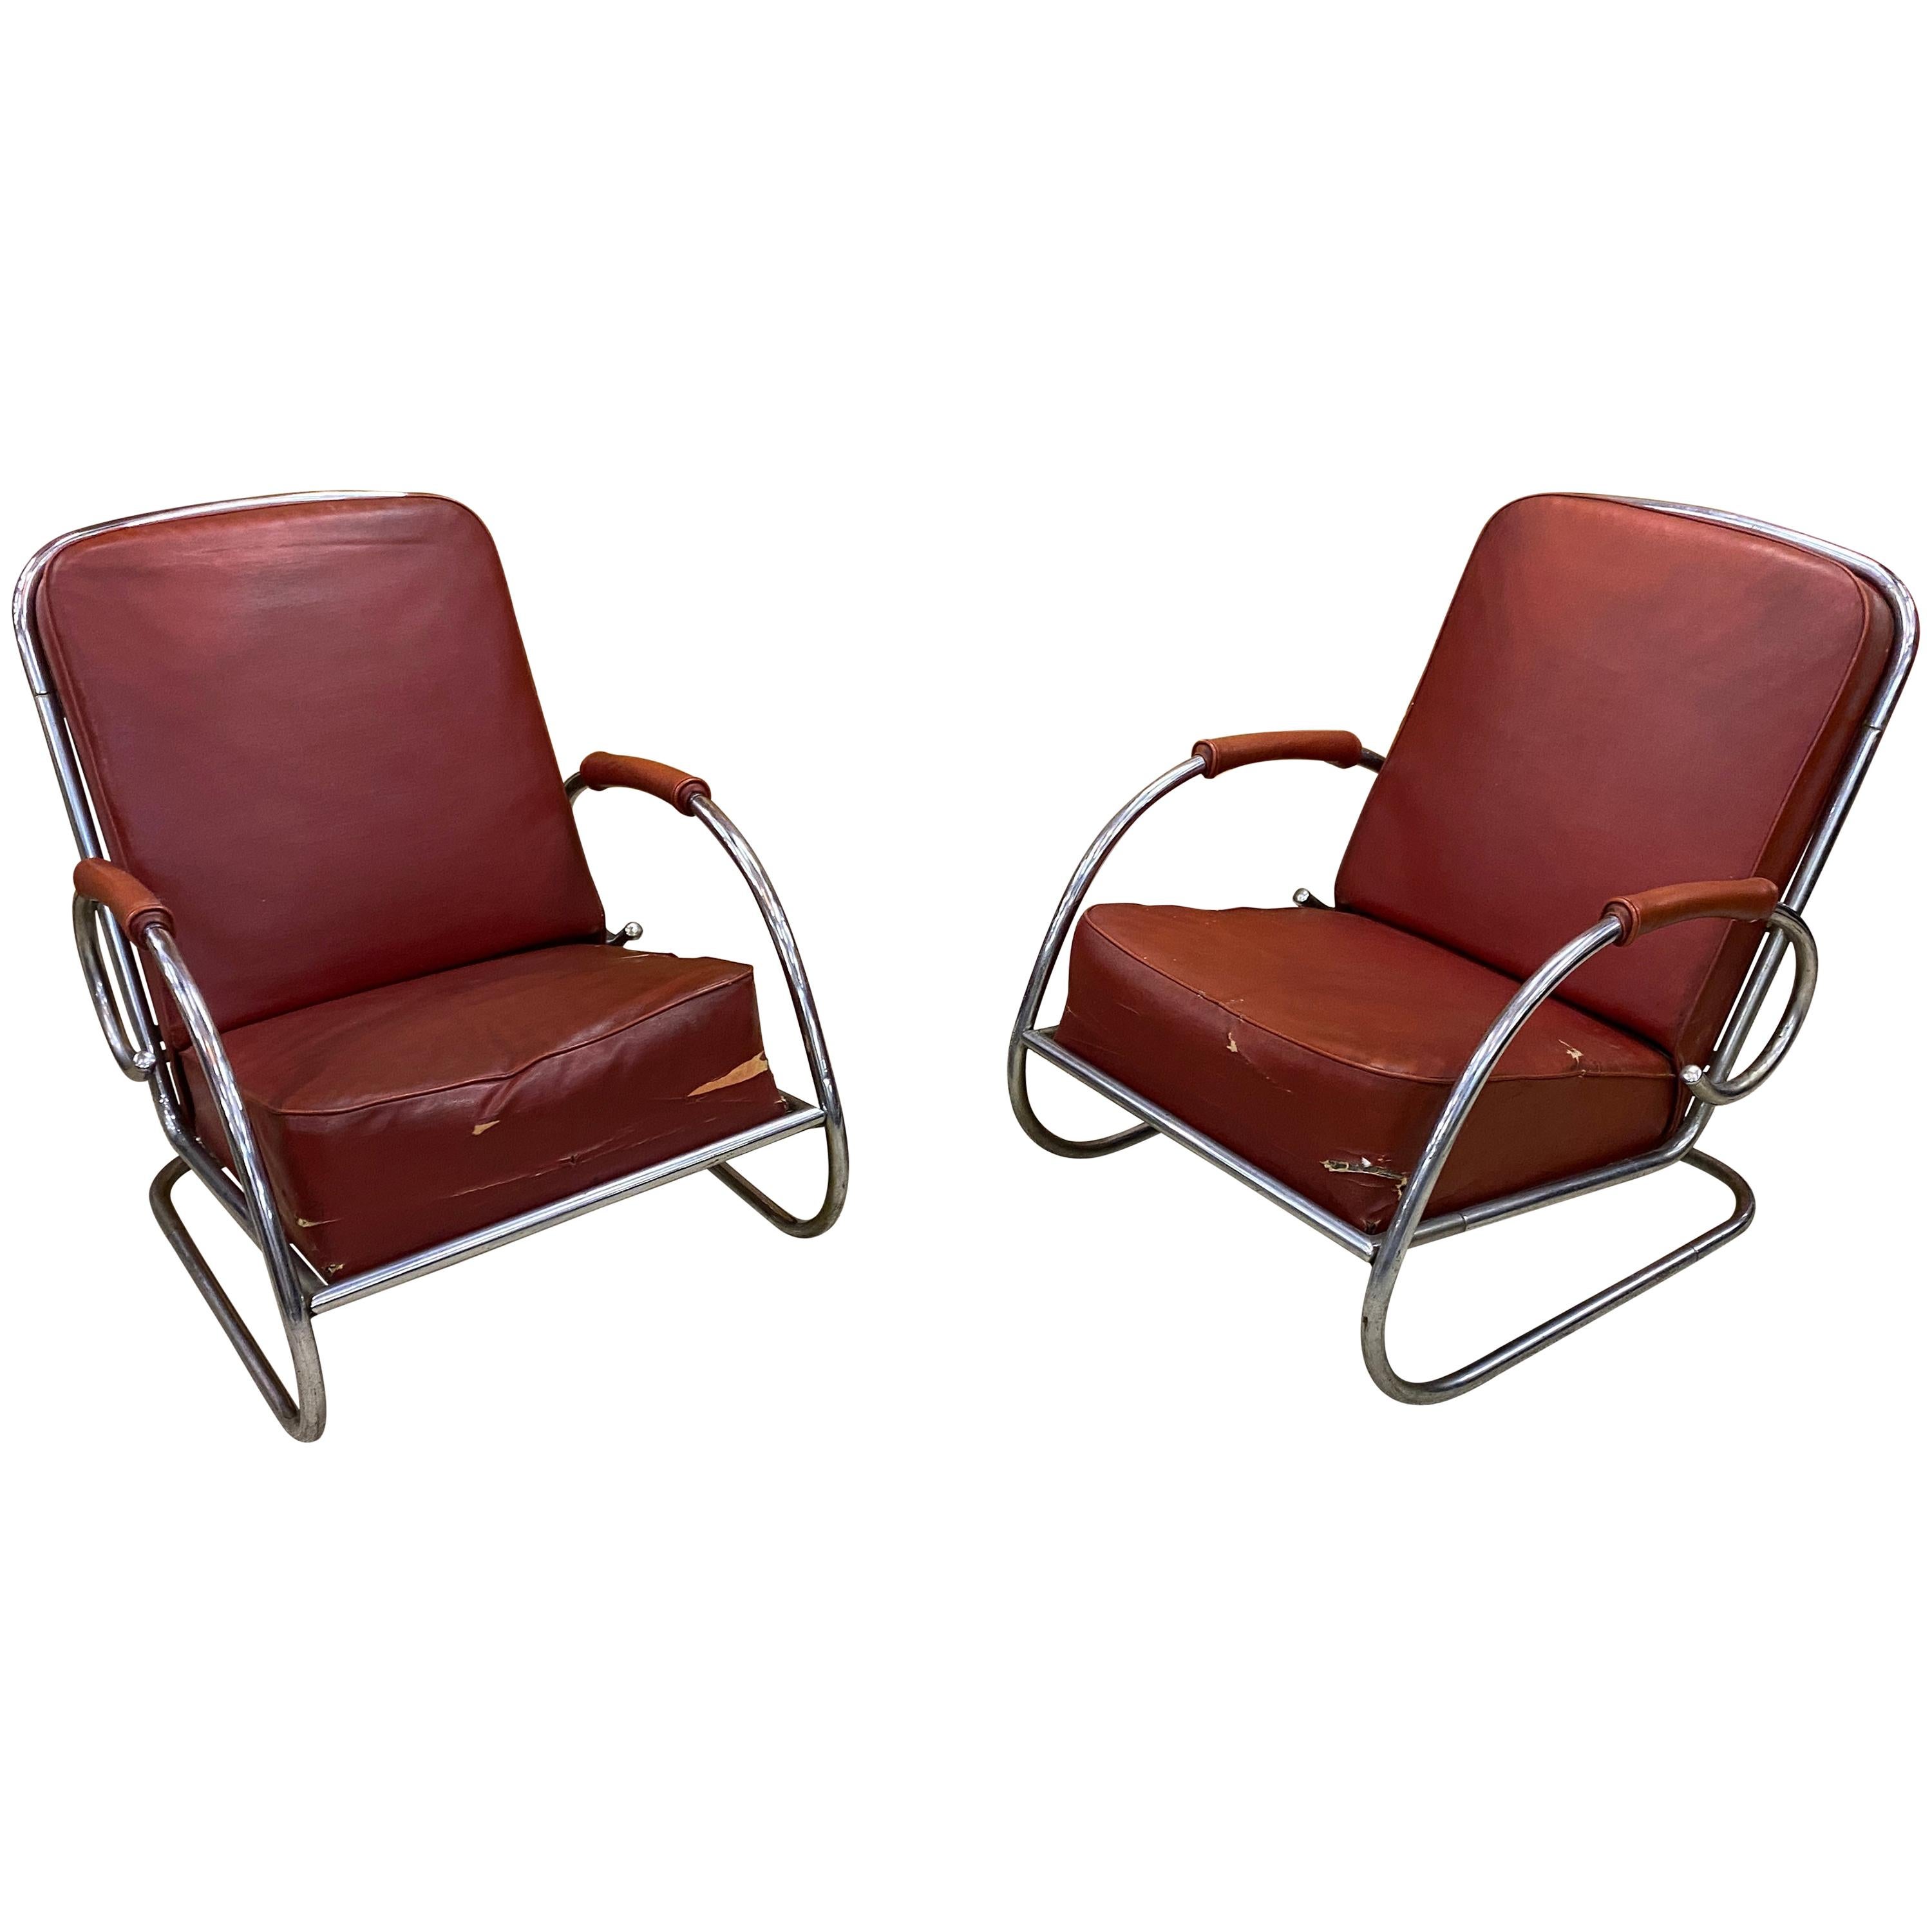 2 Modernist Art Deco Armchairs in Chromed Metal and Faux Leather circa 1920-1930